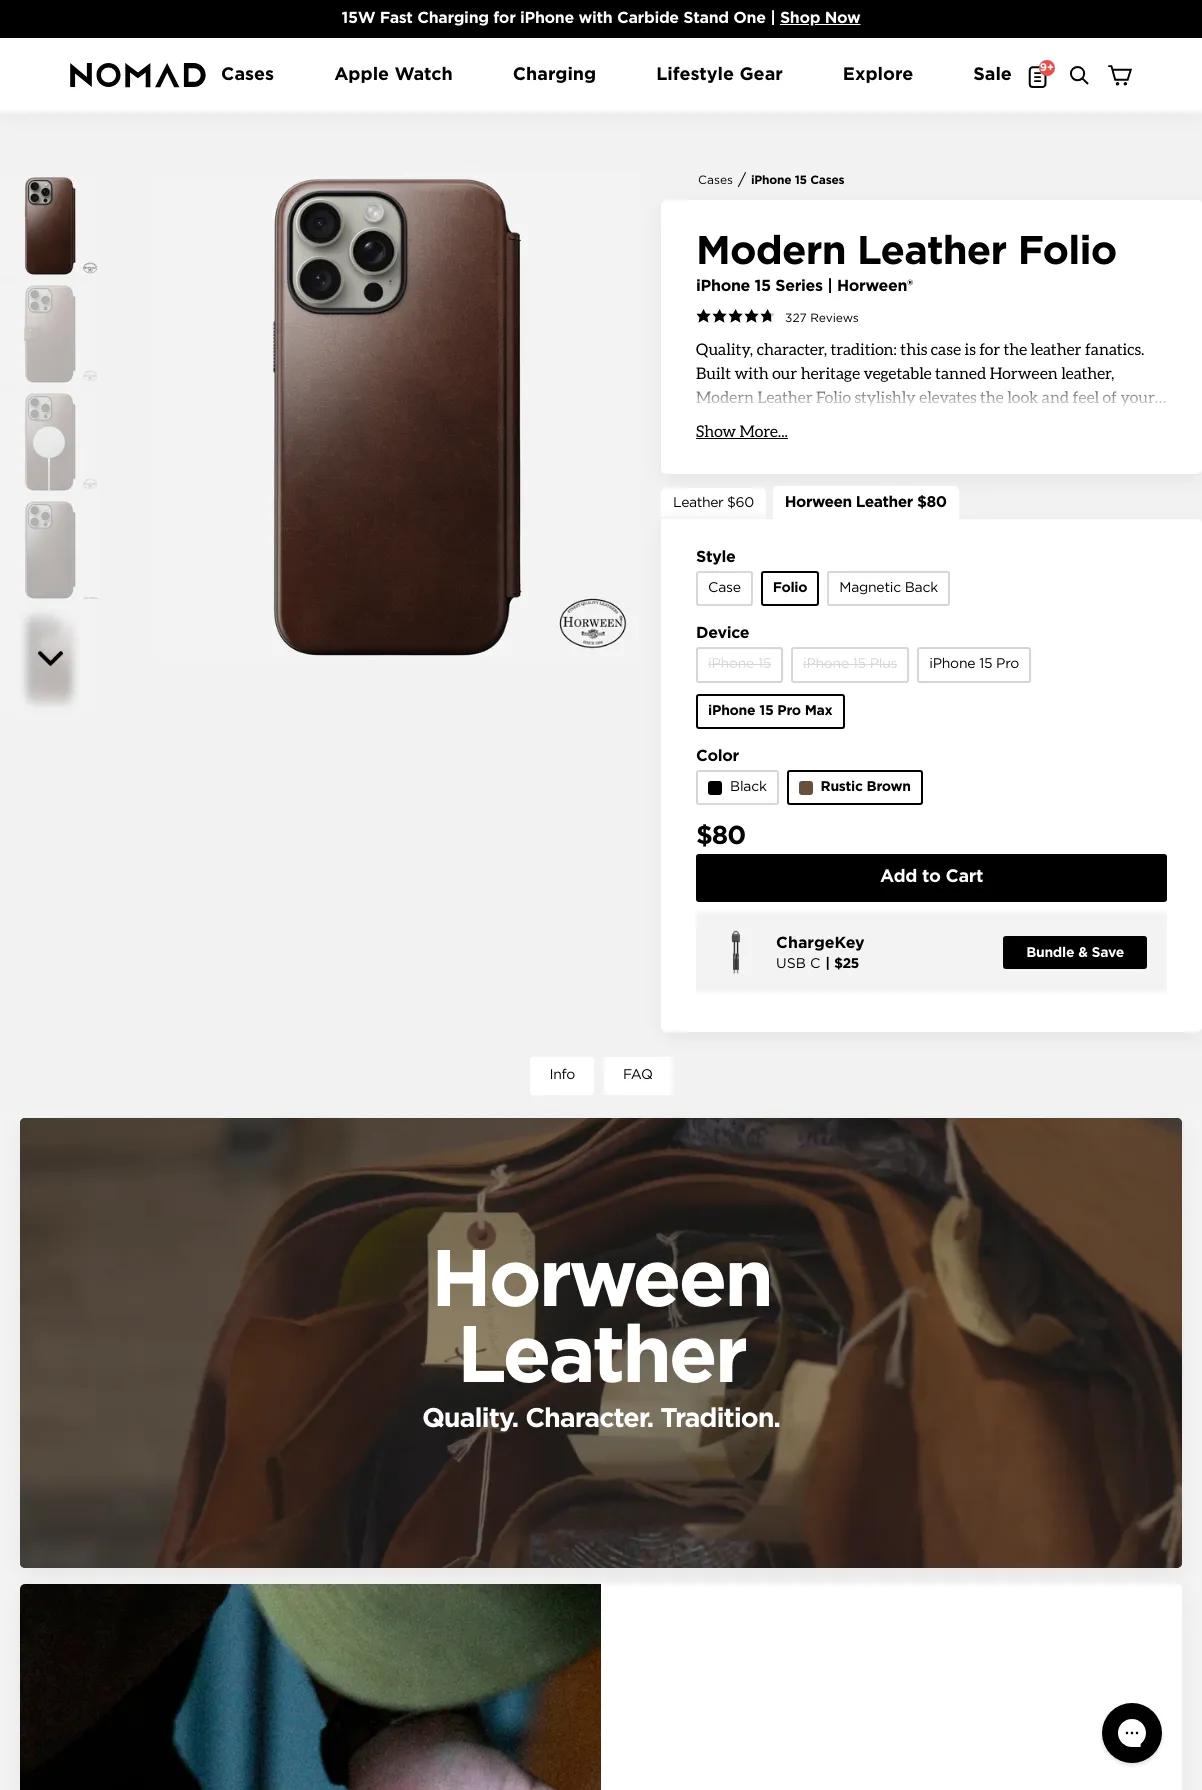 Screenshot 3 of Nomad Goods (Example Shopify Website)